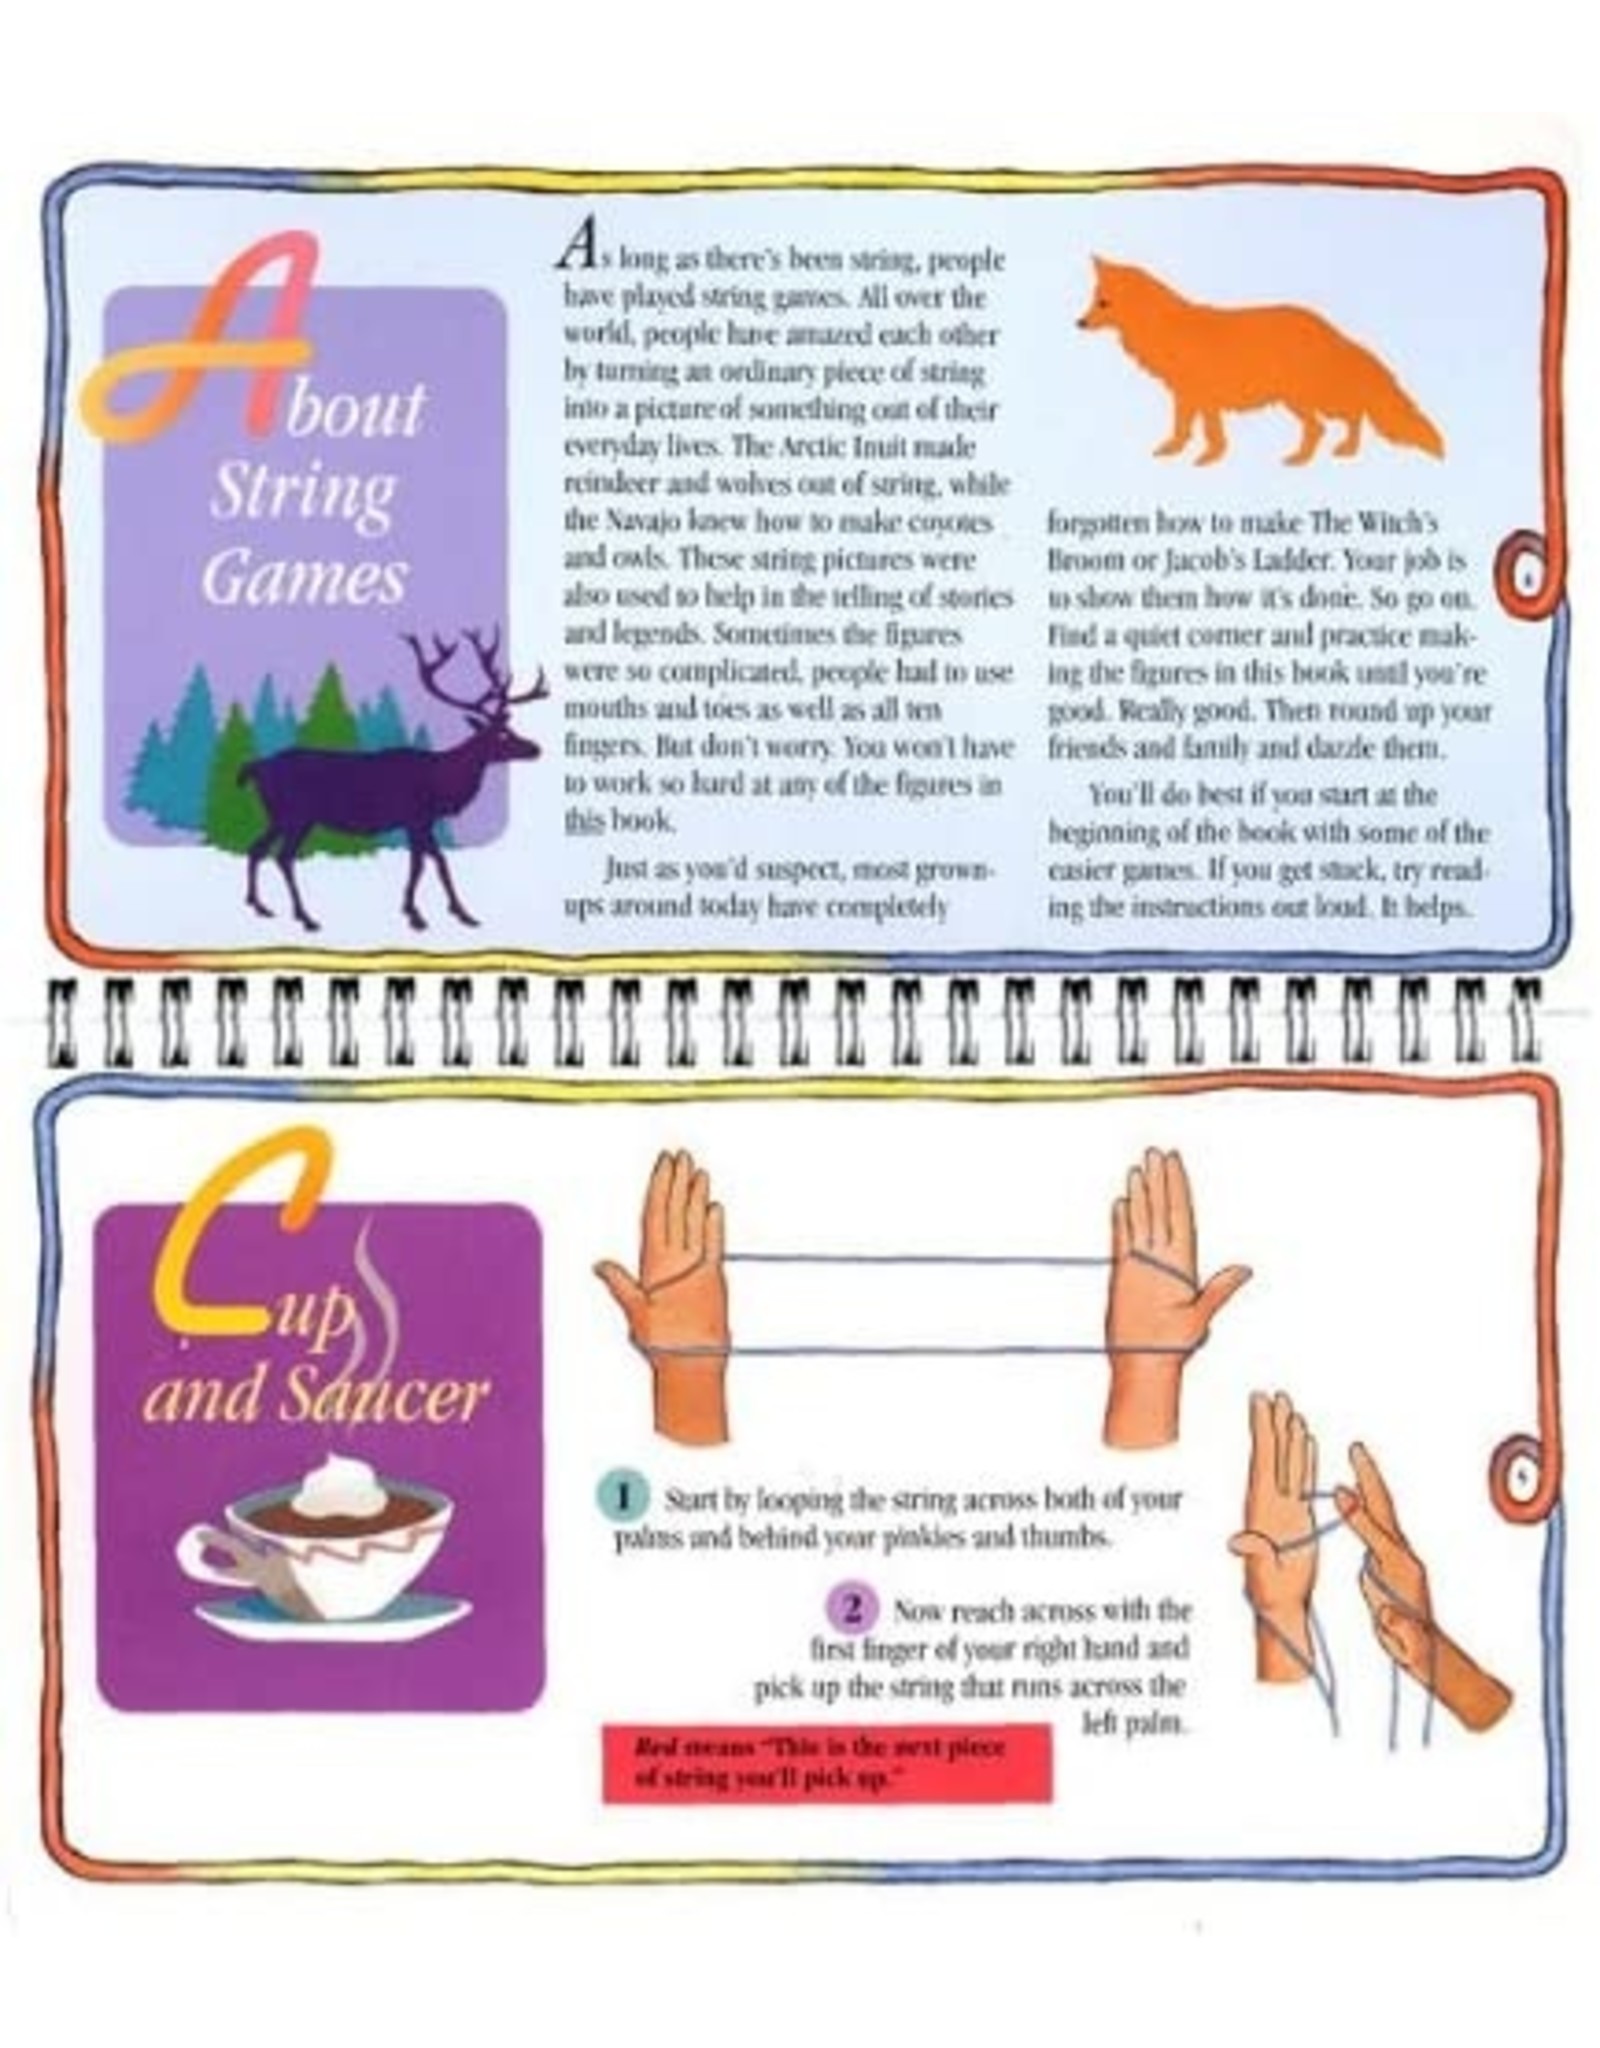 Cat's Cradle Book - Anne Akers Johnson